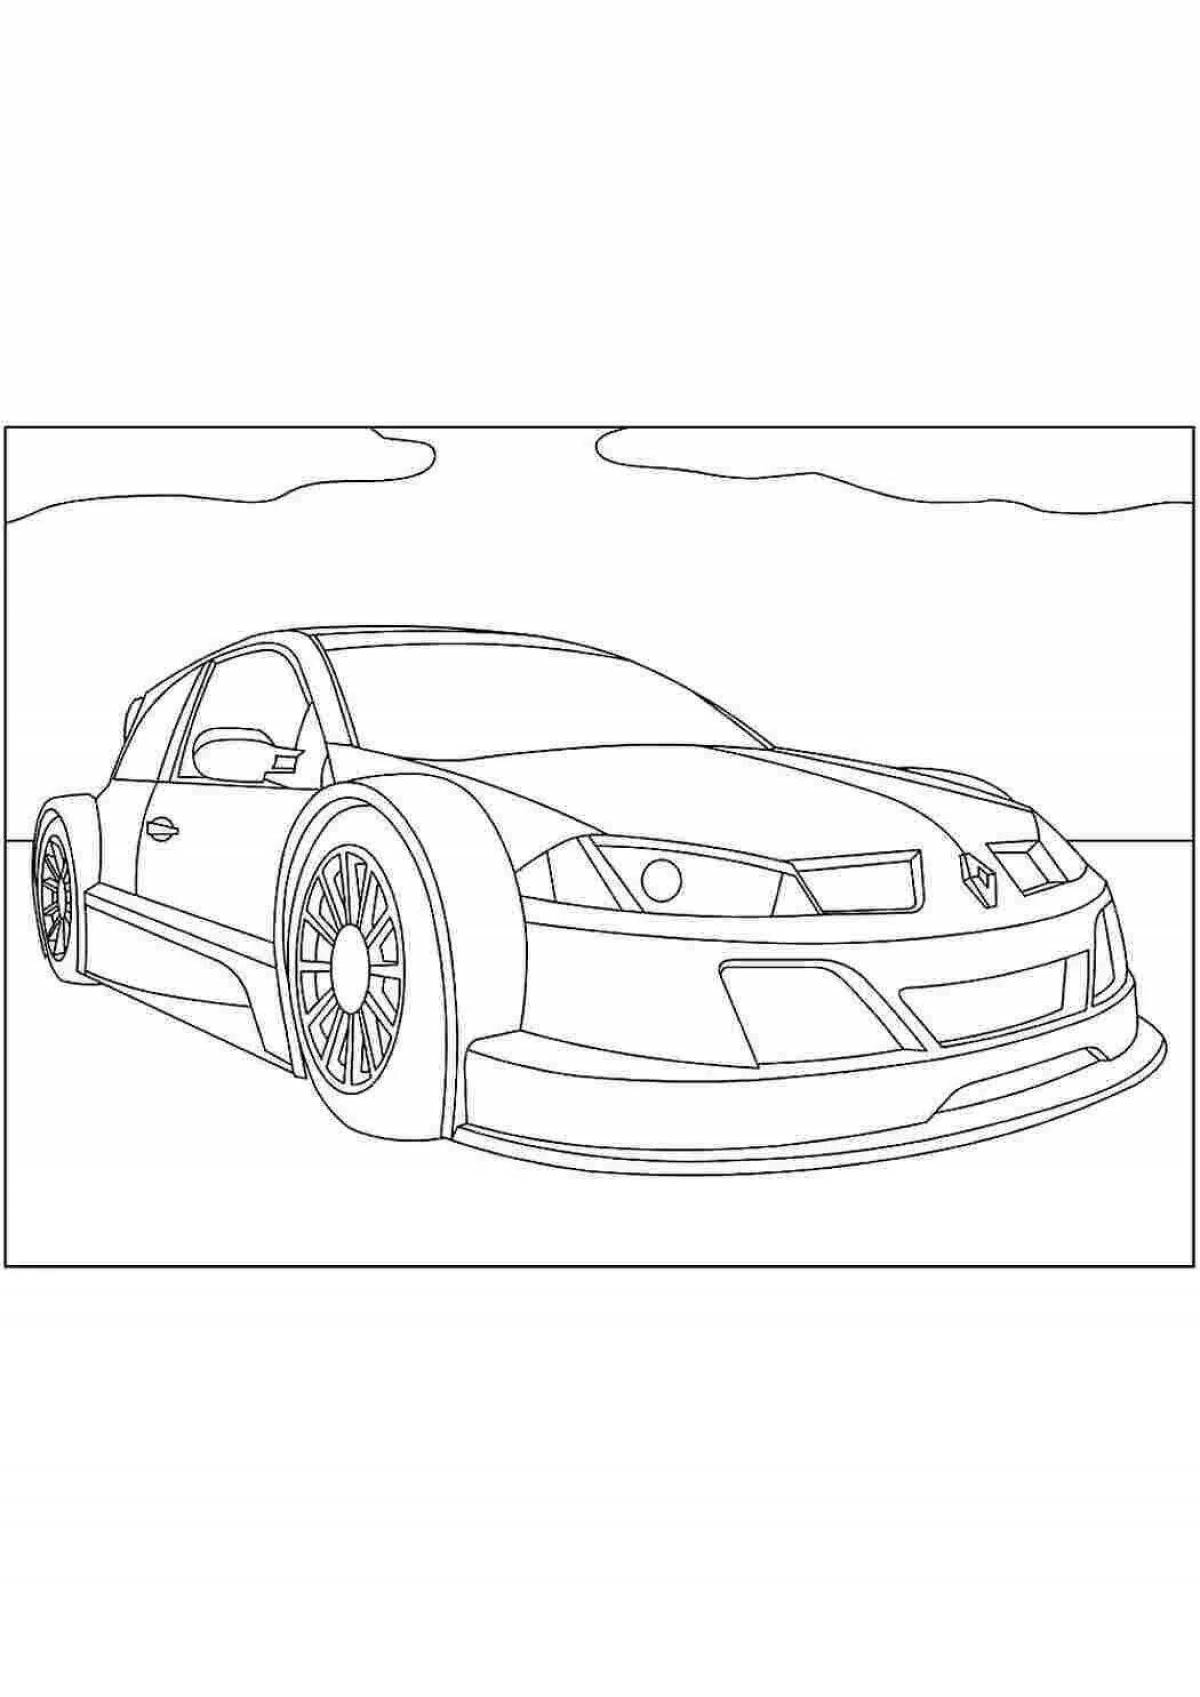 Coloring pages grand cars for boys 8-9 years old